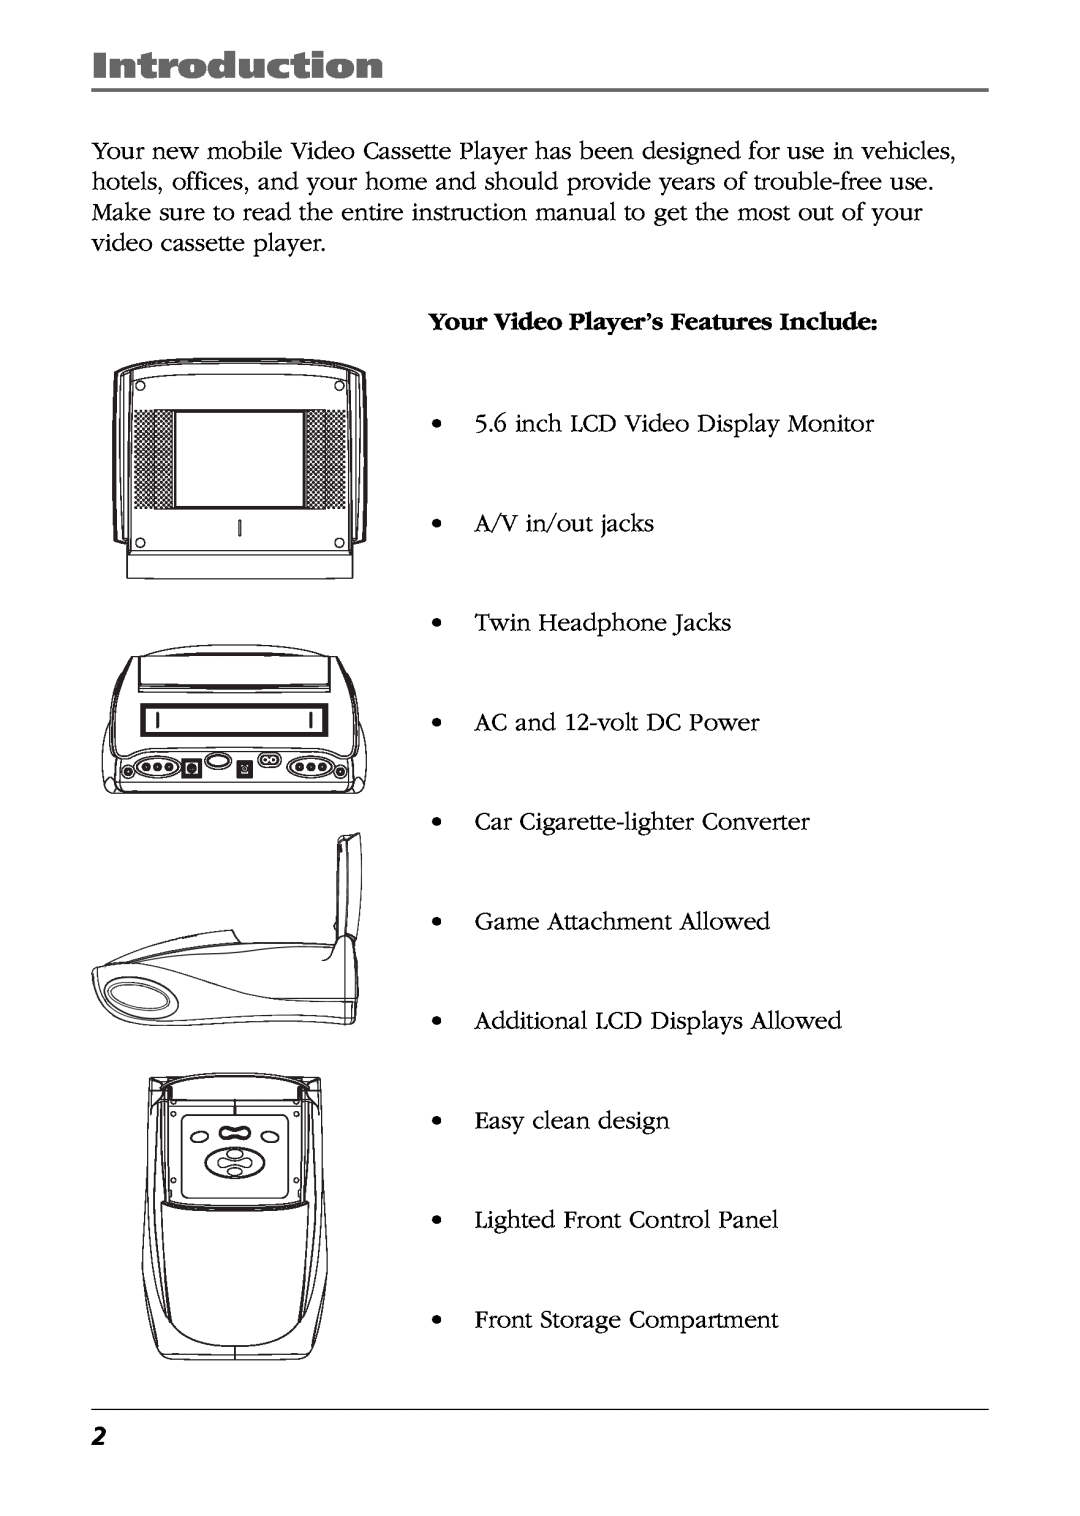 RCA Mobile Video Cassette Player manual Introduction, Your Video Player’s Features Include 